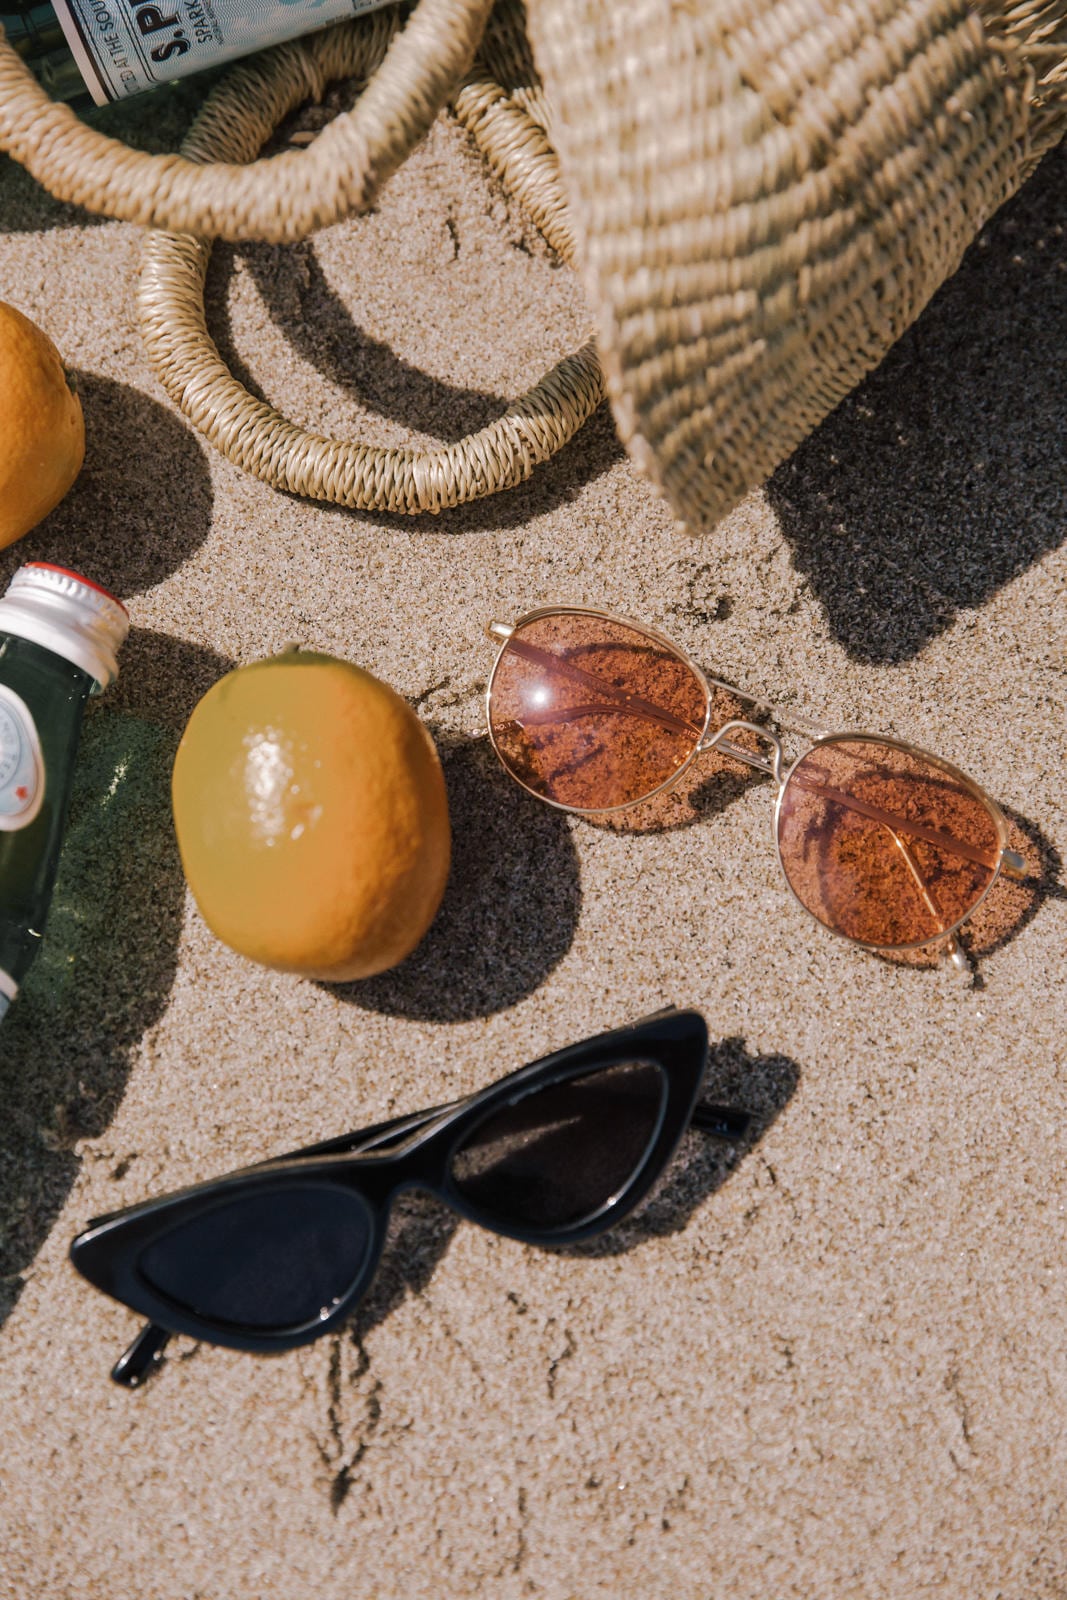 Sunglasses I Can't Stop Wearing This Summer by Pam Hetlinger | Beach Flatlay, sunglasses trends